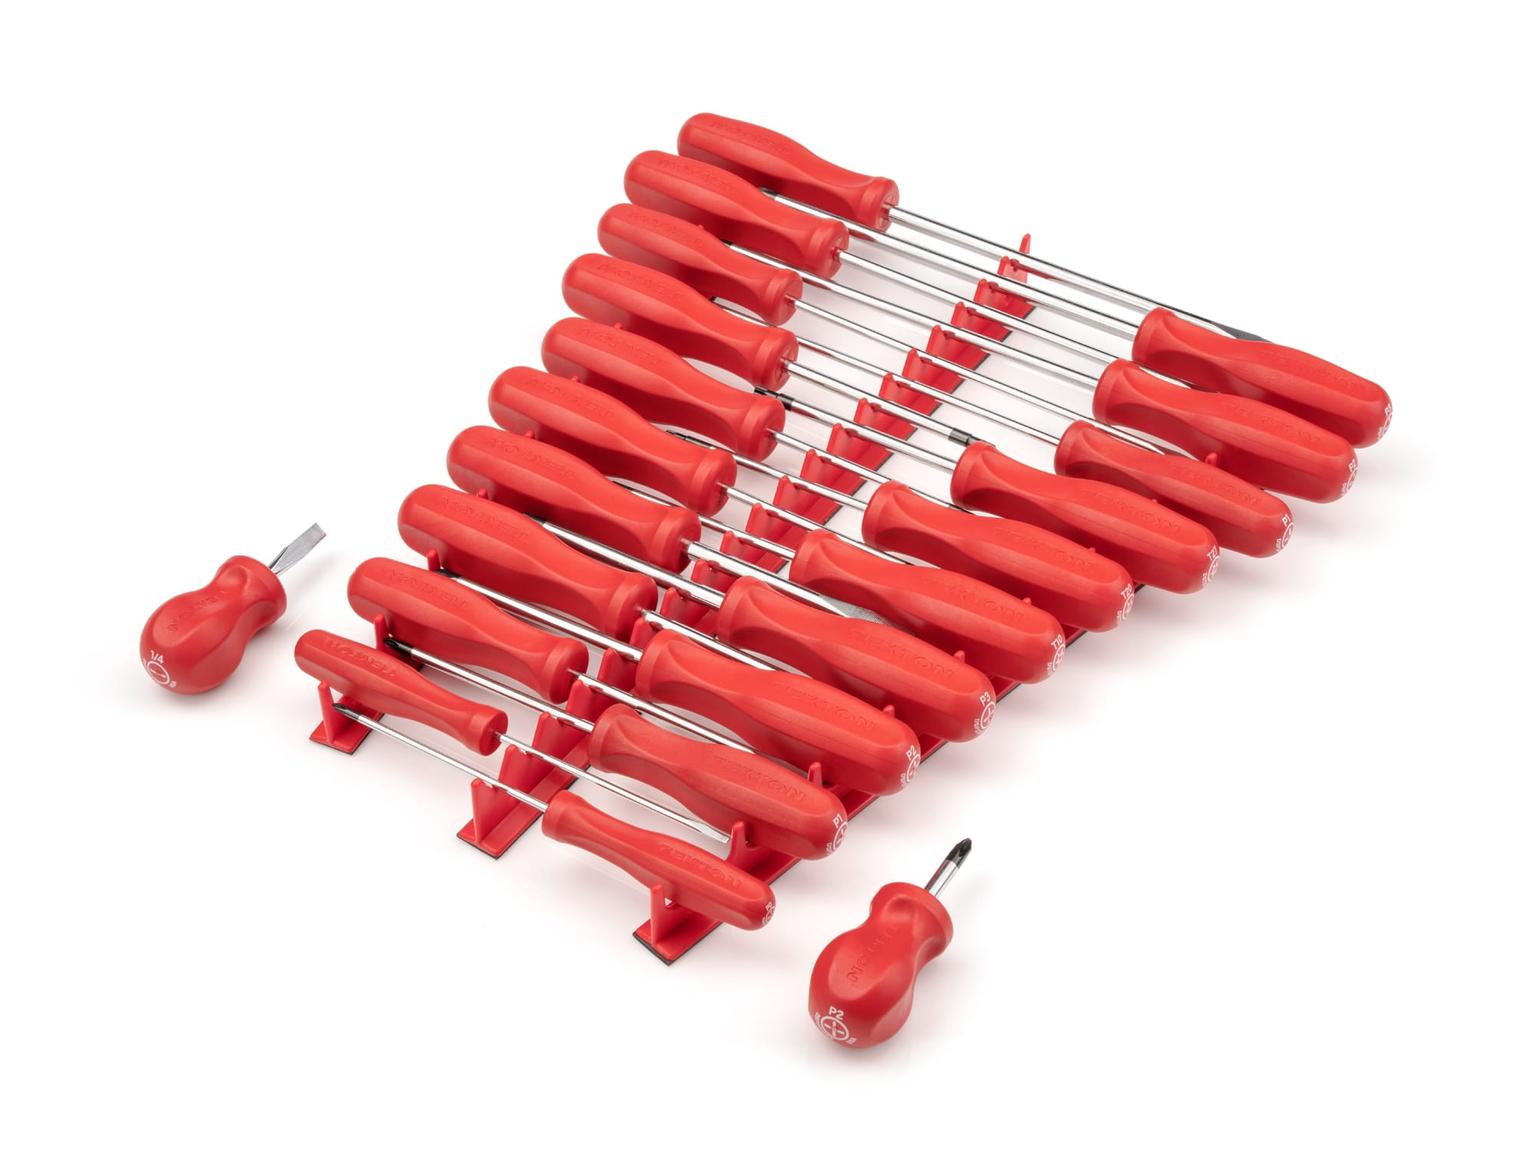 TEKTON DRV42502-T Hard Handle Screwdriver Set, 22-Piece (#0-#3, 1/8-5/16 in., T10-30) with Red Rails